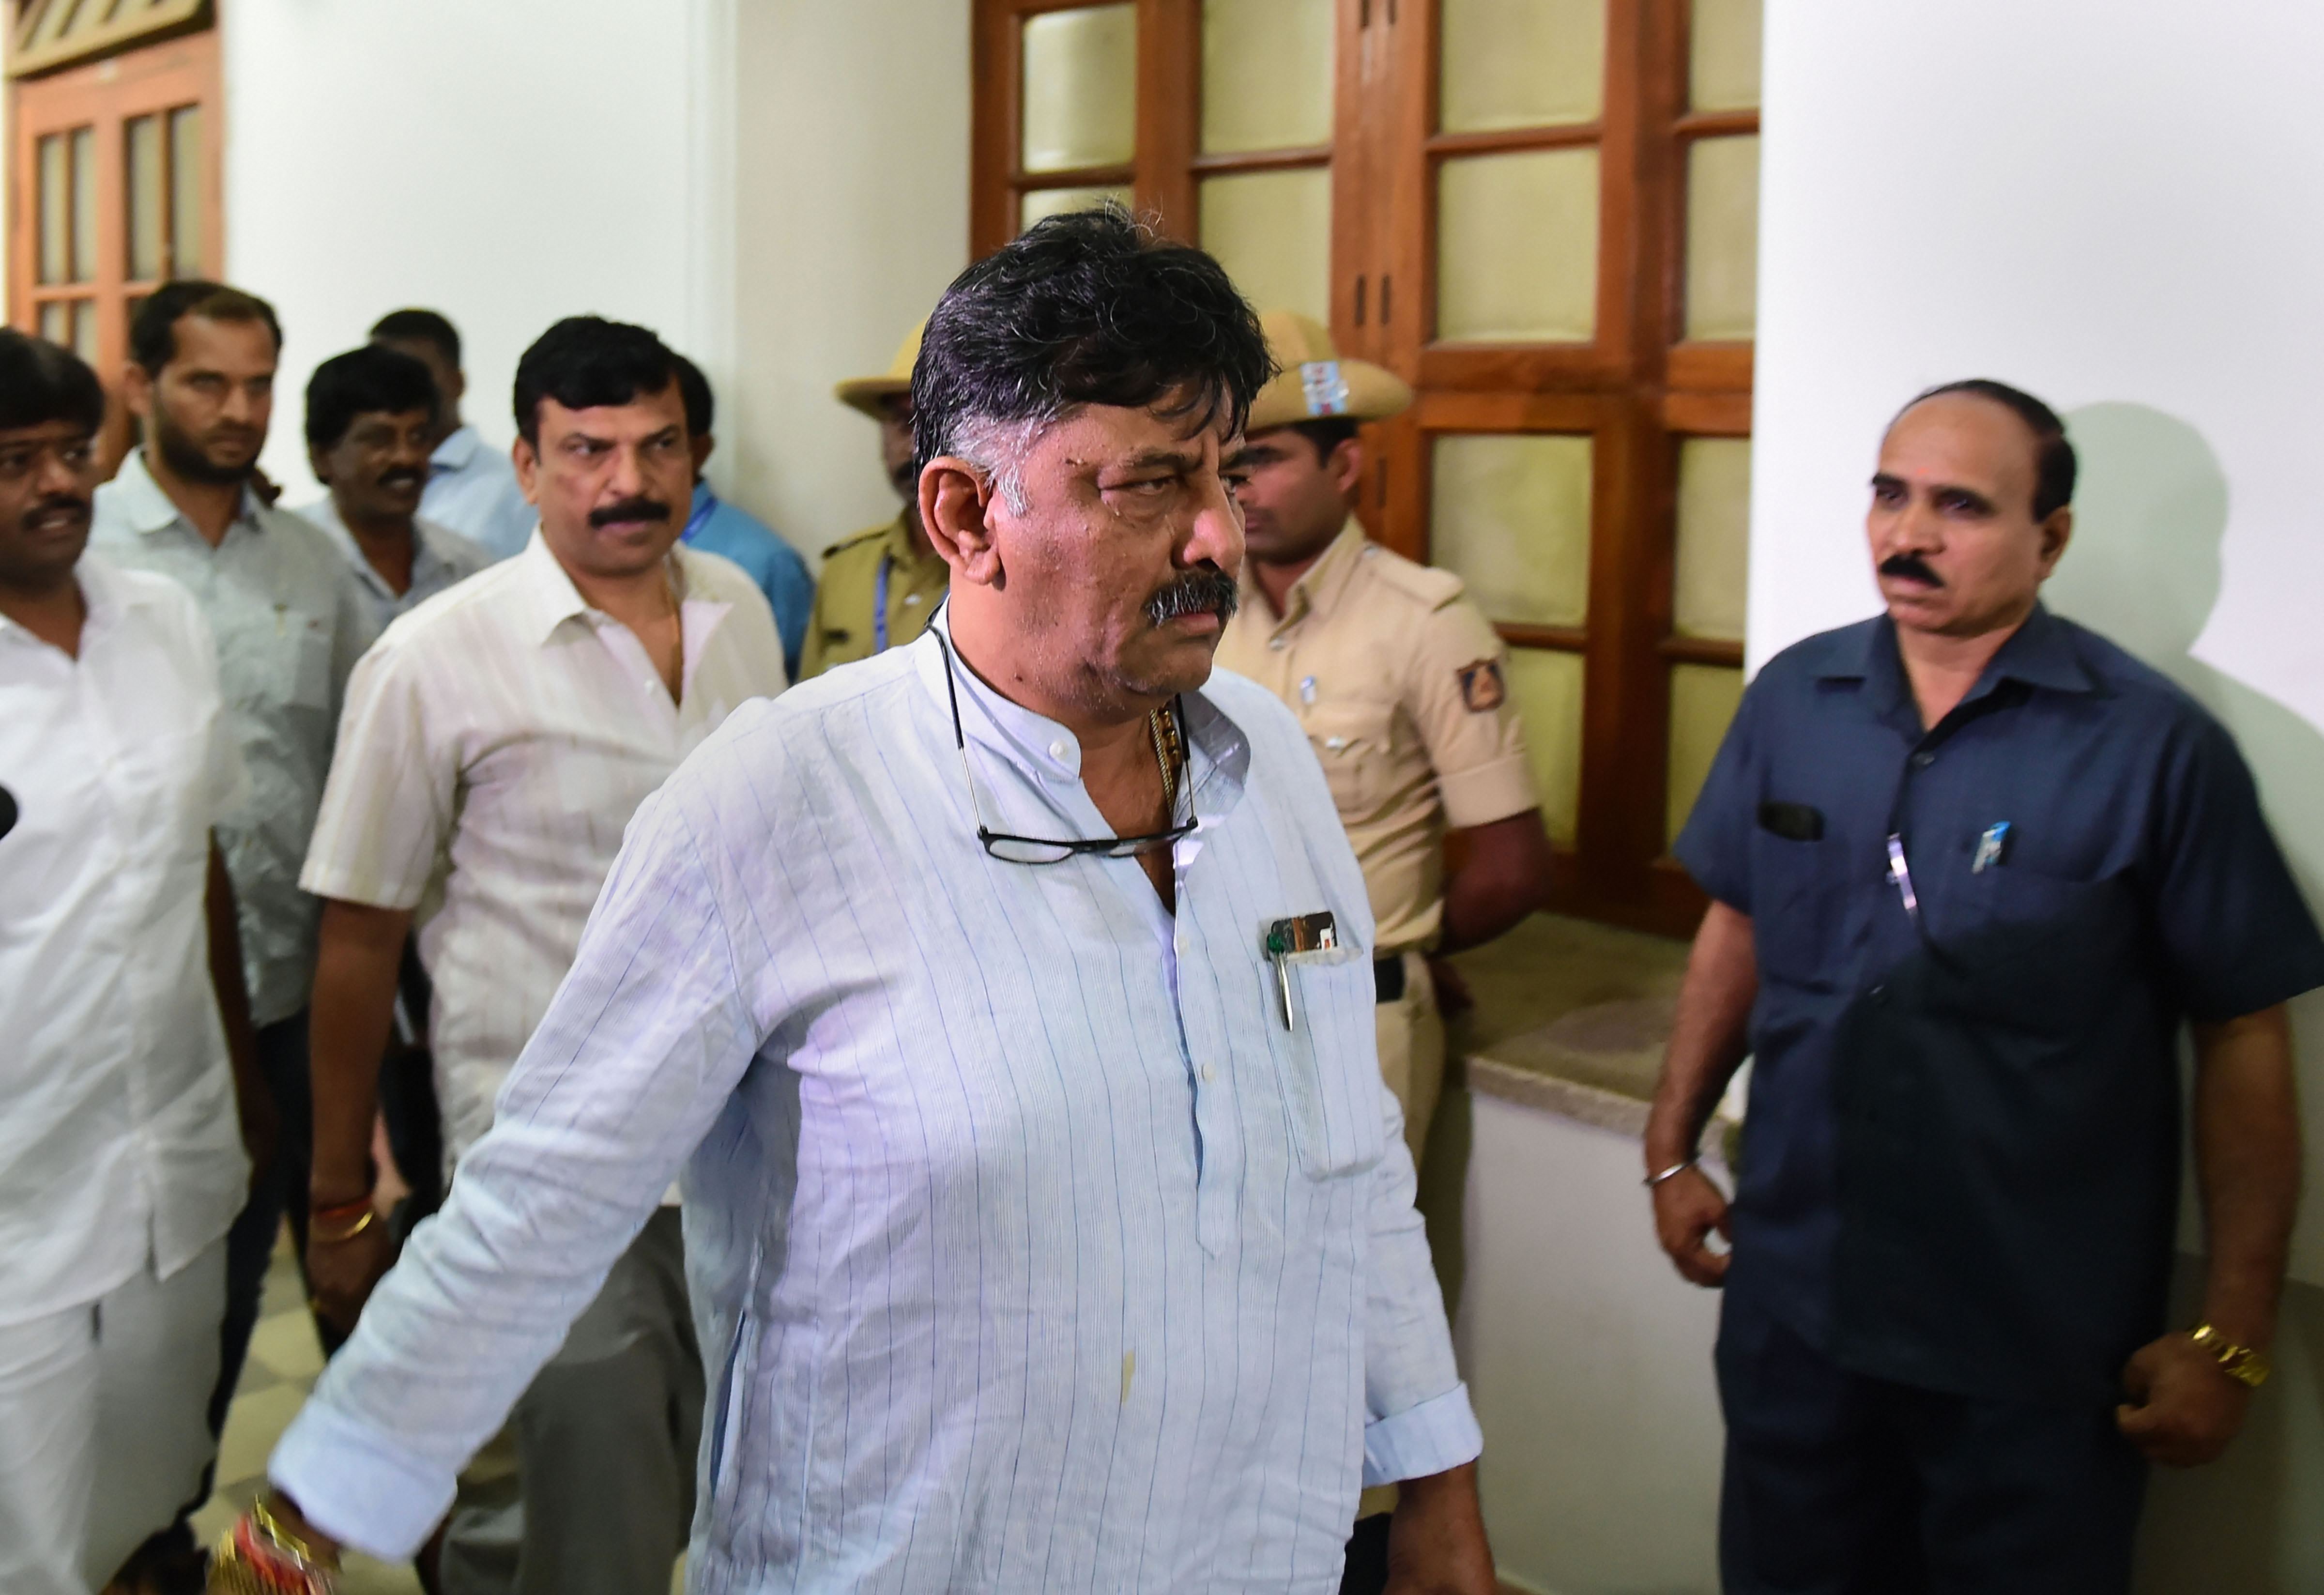 Karnataka minister and Congress leader D.K. Shivakumar arrives at Vidhana Soudha in Bengaluru on July 9. A day later, Shivakumar was outside the Mumbai hotel in a bid to meet the dissident MLAs of the Congress and the JDS, but they refused to meet him in the morning. 